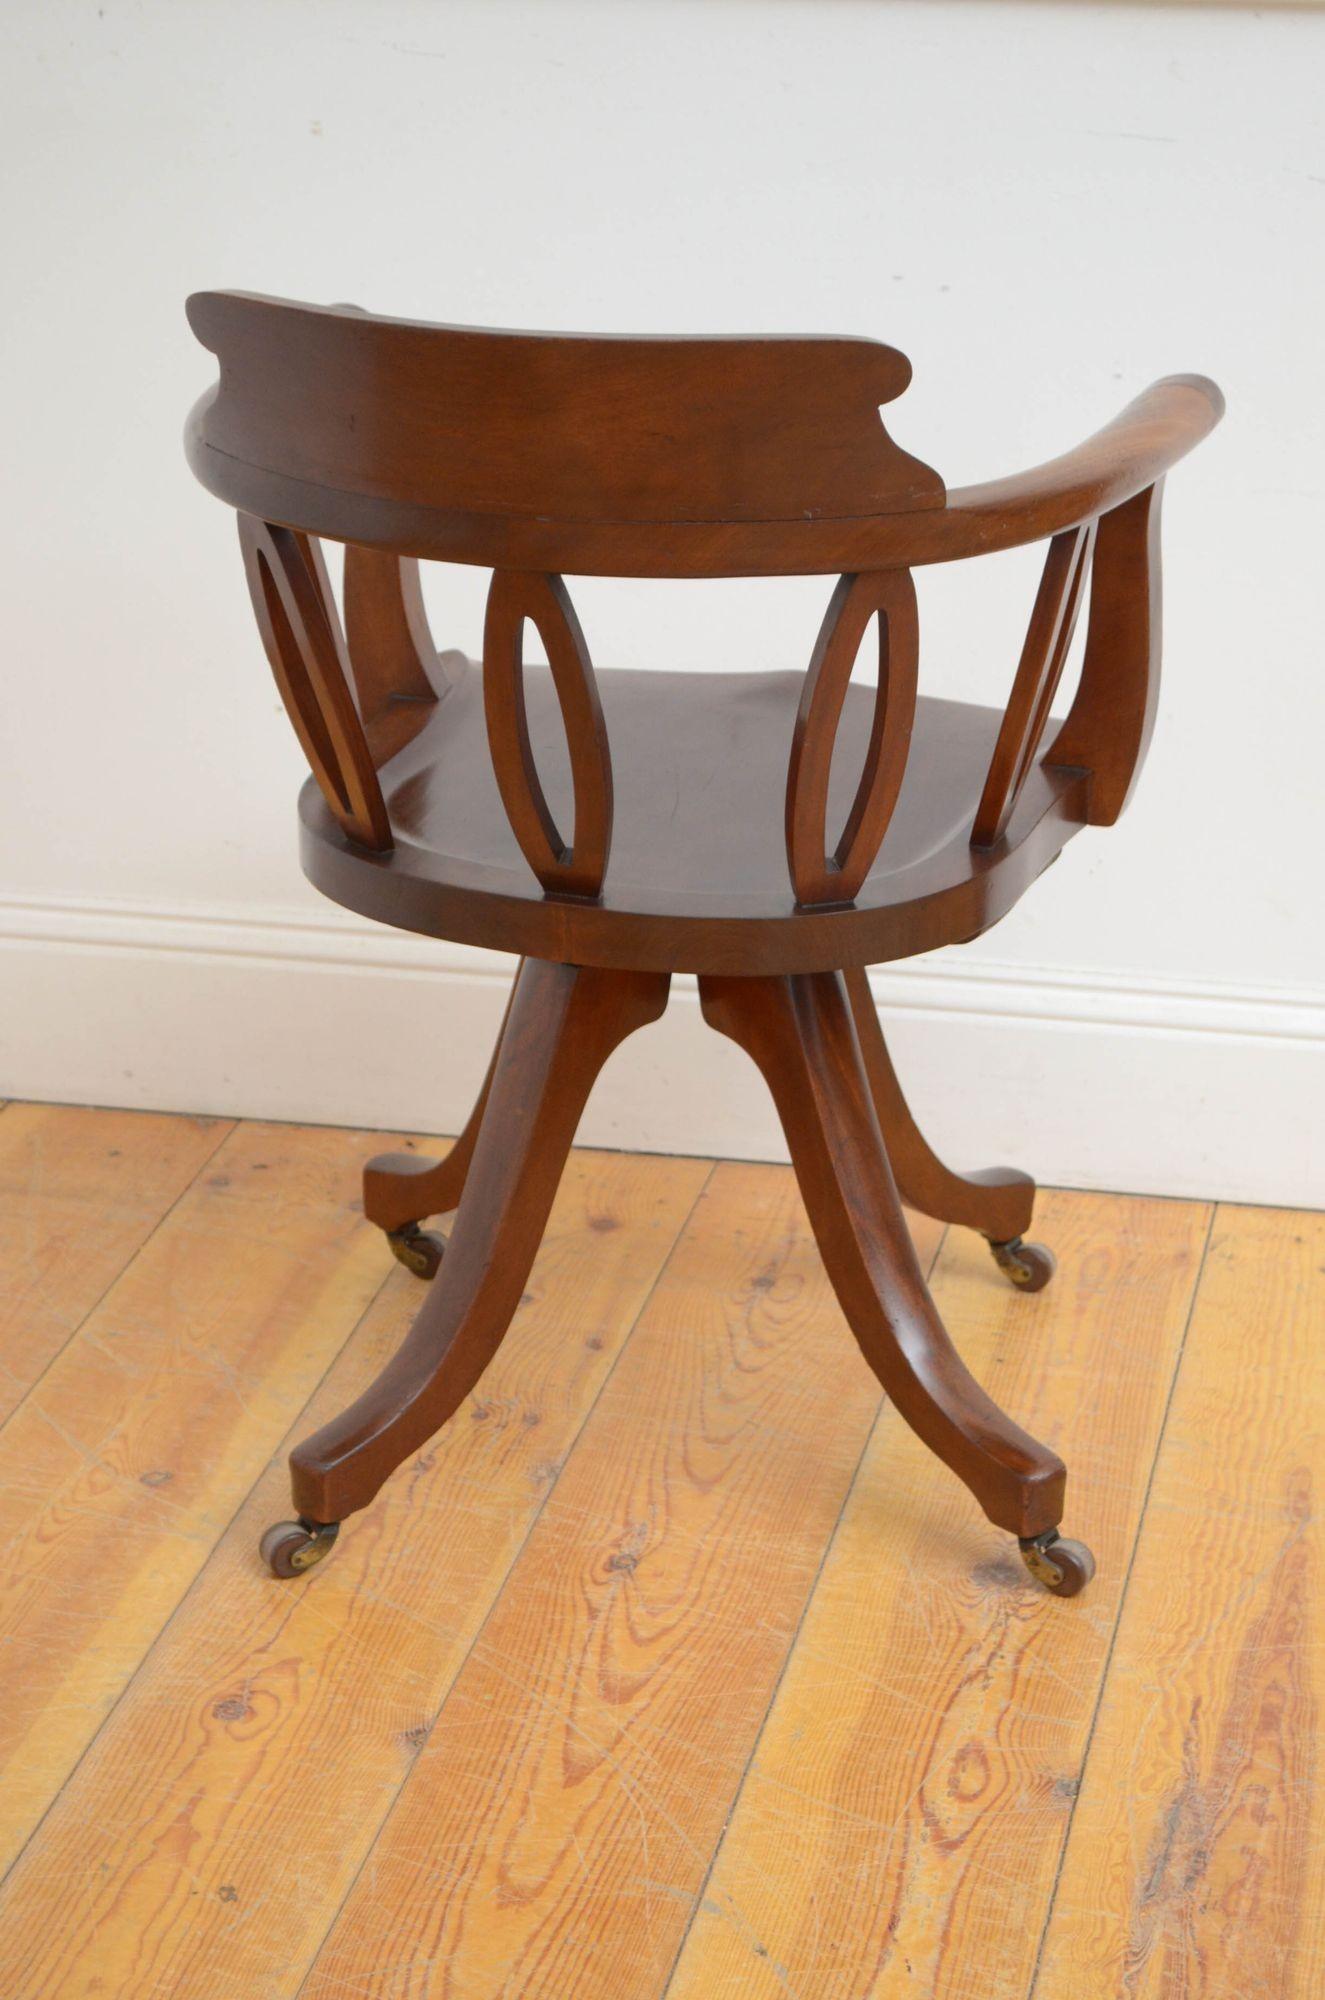 Victorian Mahogany Revolving Office Chair In Good Condition For Sale In Whaley Bridge, GB